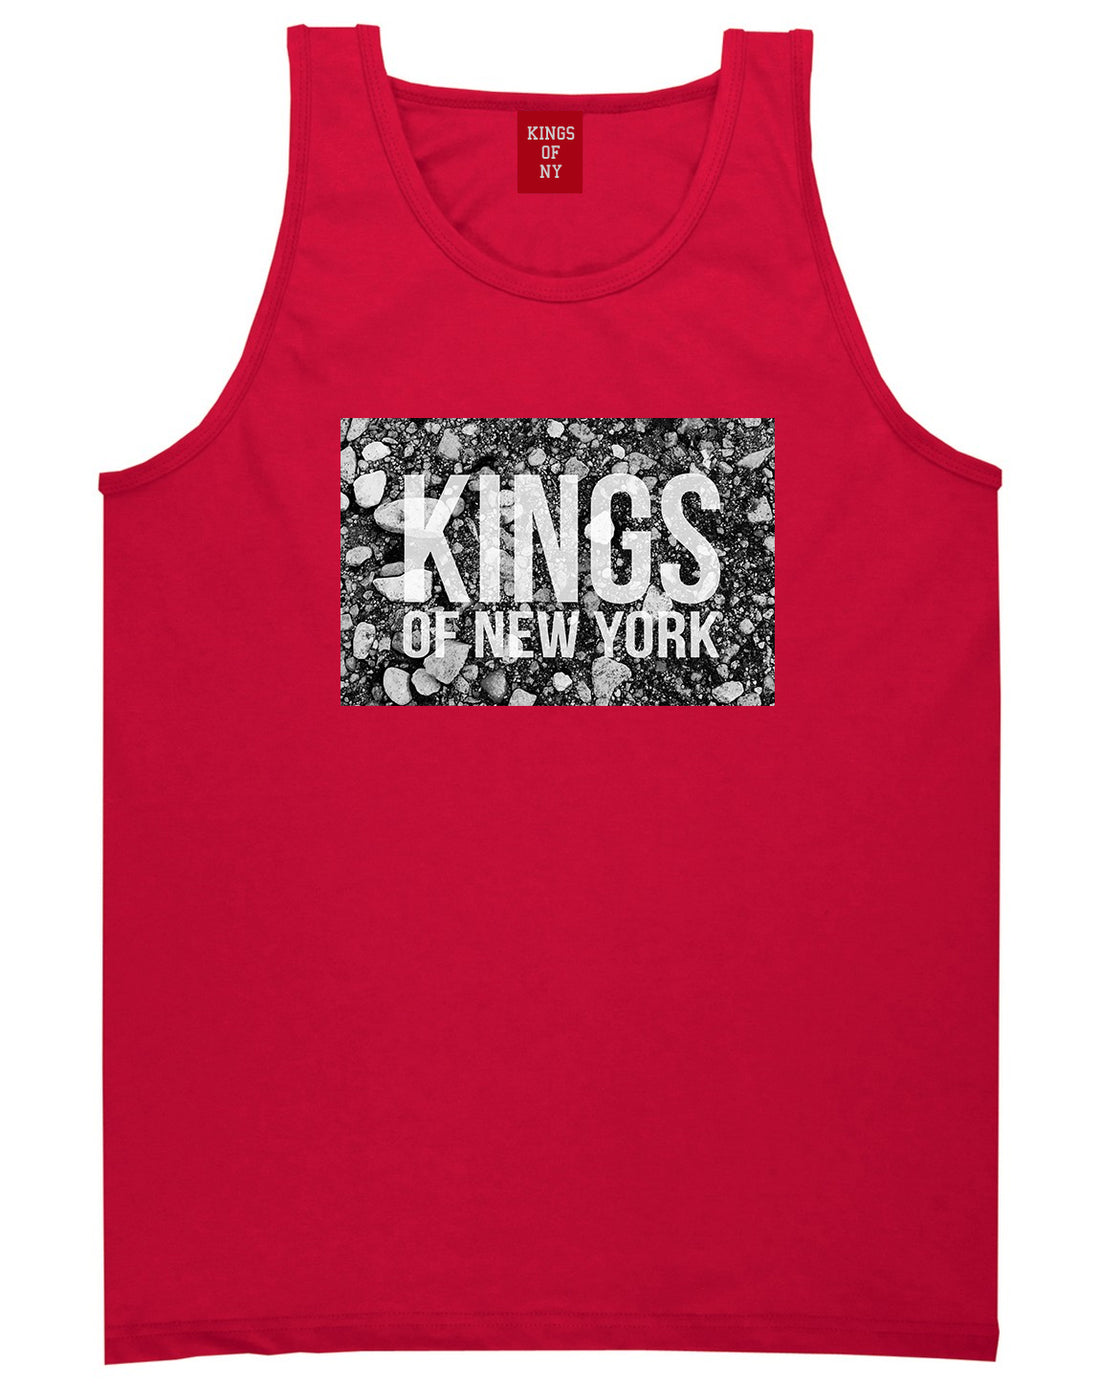 Came From The Dirt KONY Mens Tank Top Shirt Red